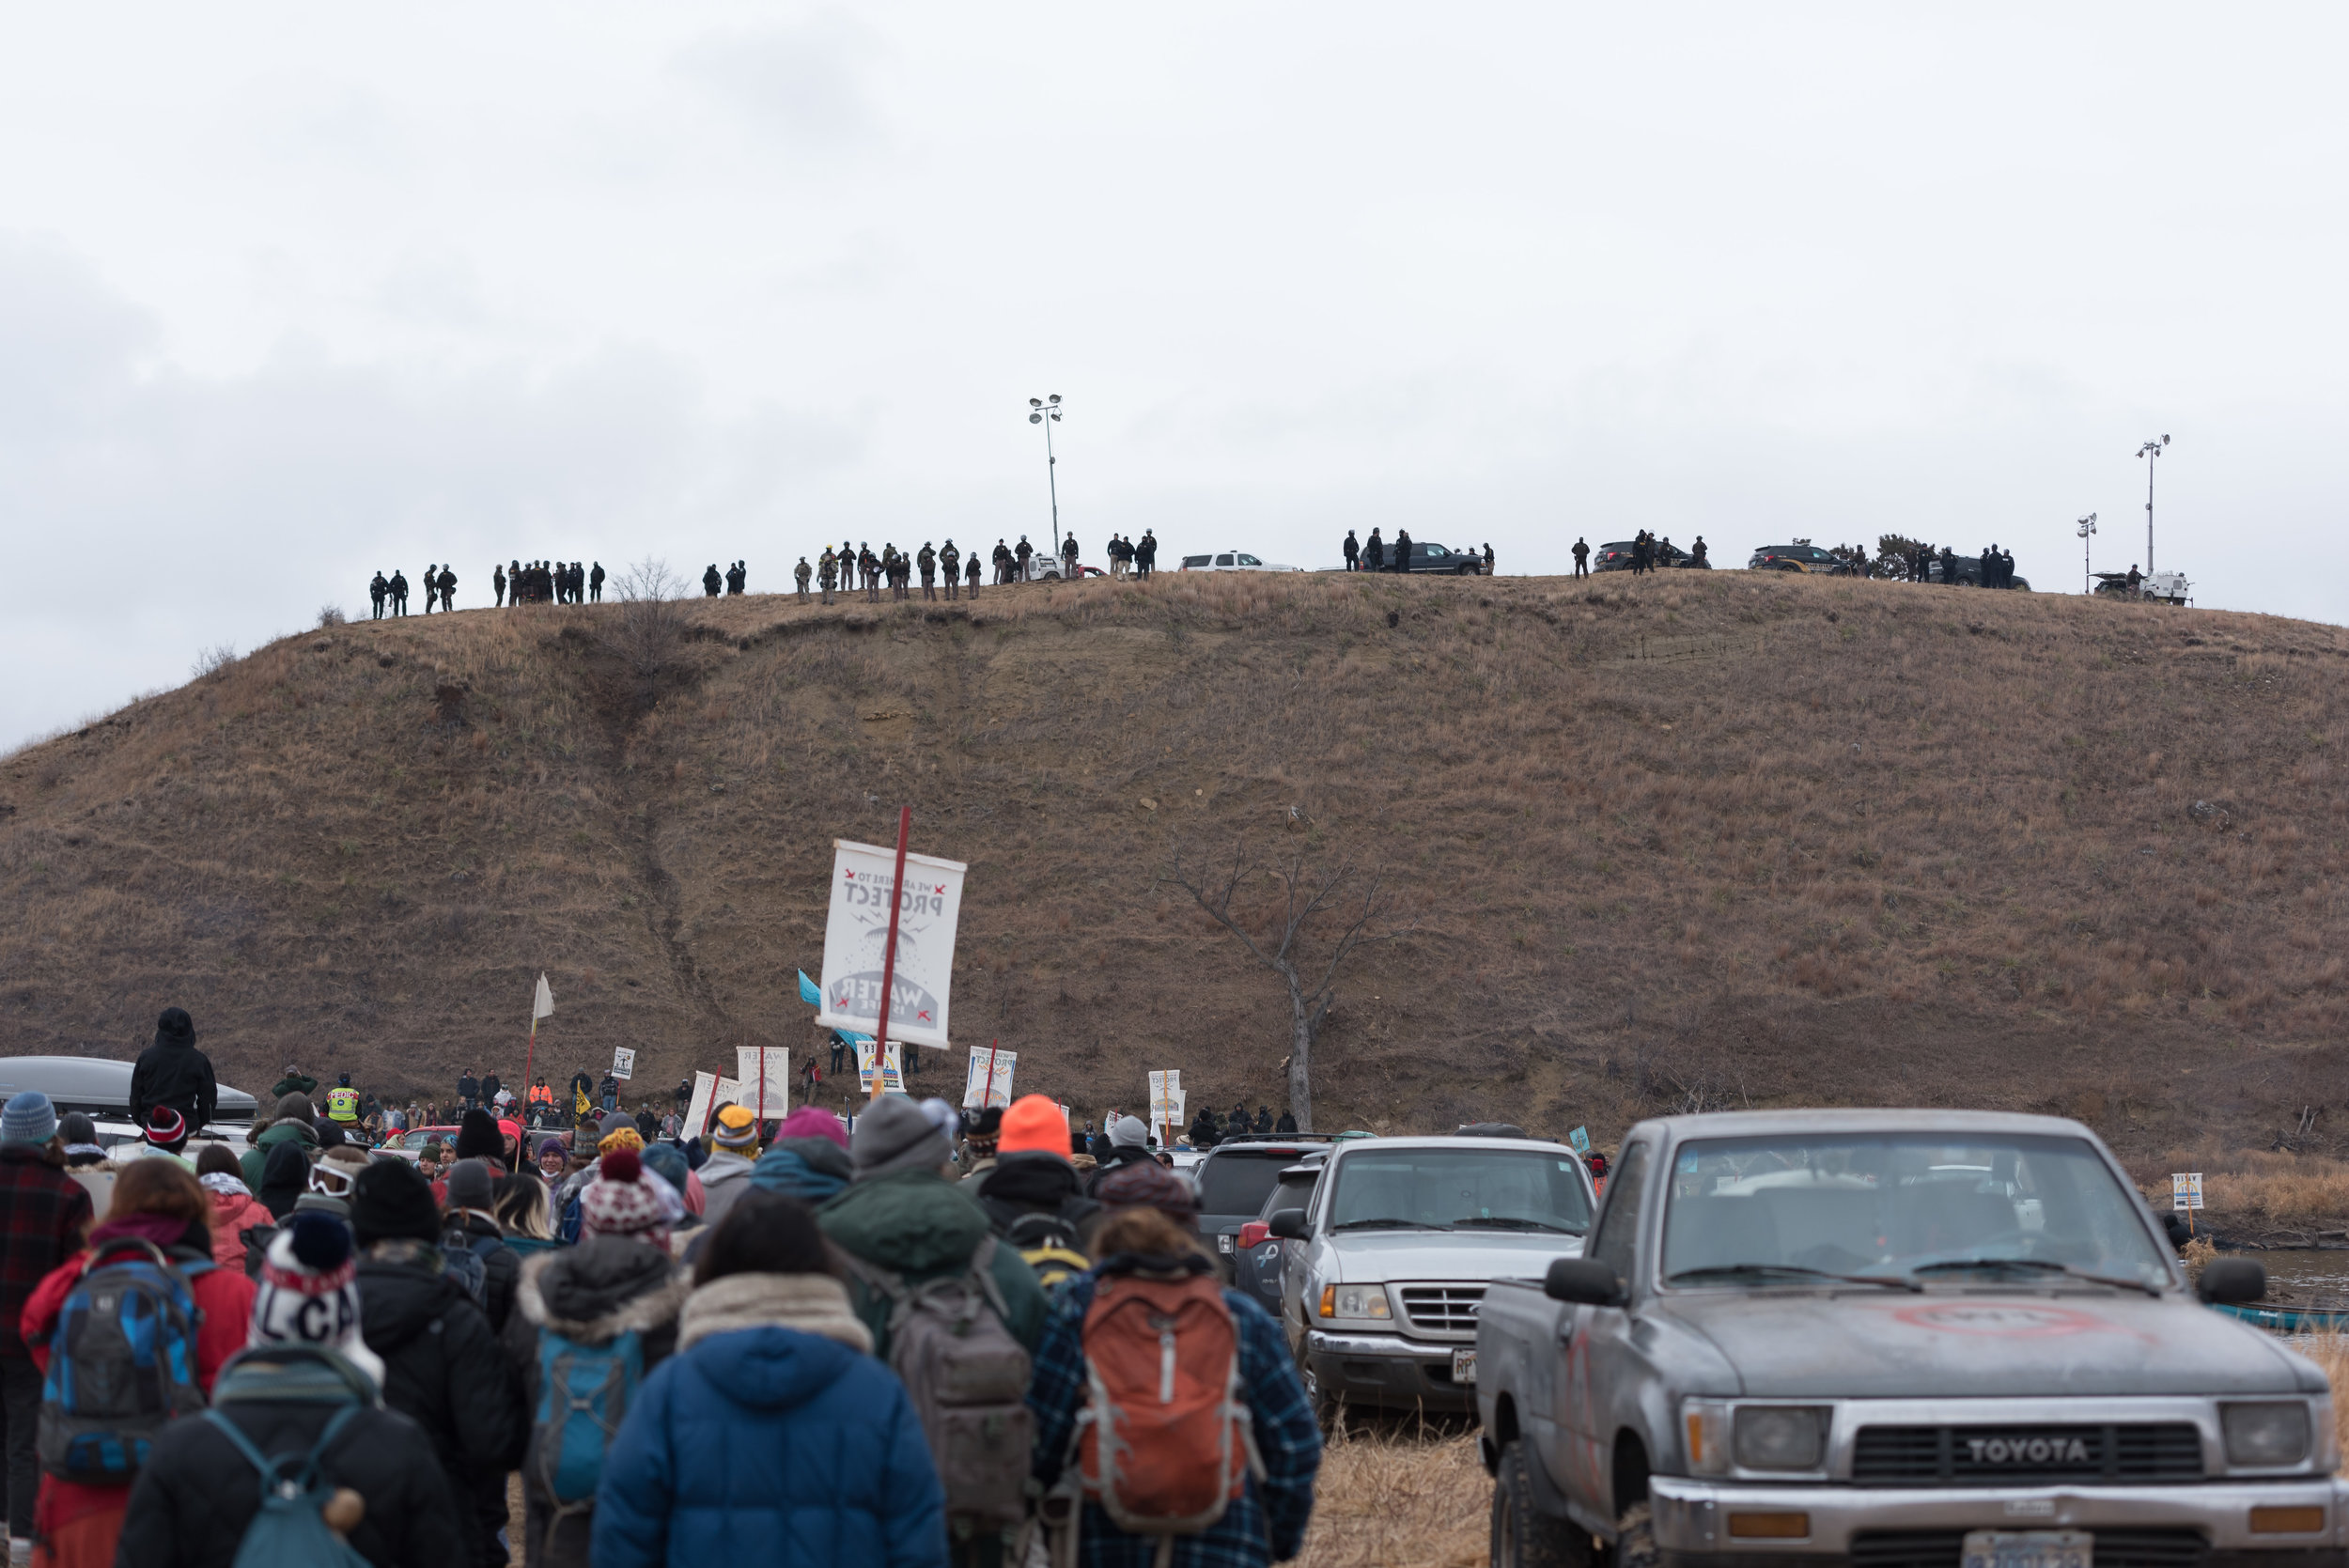  CANNON BALL, North Dakota — Water protectors march from Oceti Sakowin to Turtle Island to help other protesters on Thursday, Nov. 24. Standing Rock Sioux say that Turtle Island is a a sacred burial ground and part of the Dakota Access Pipeline is sc